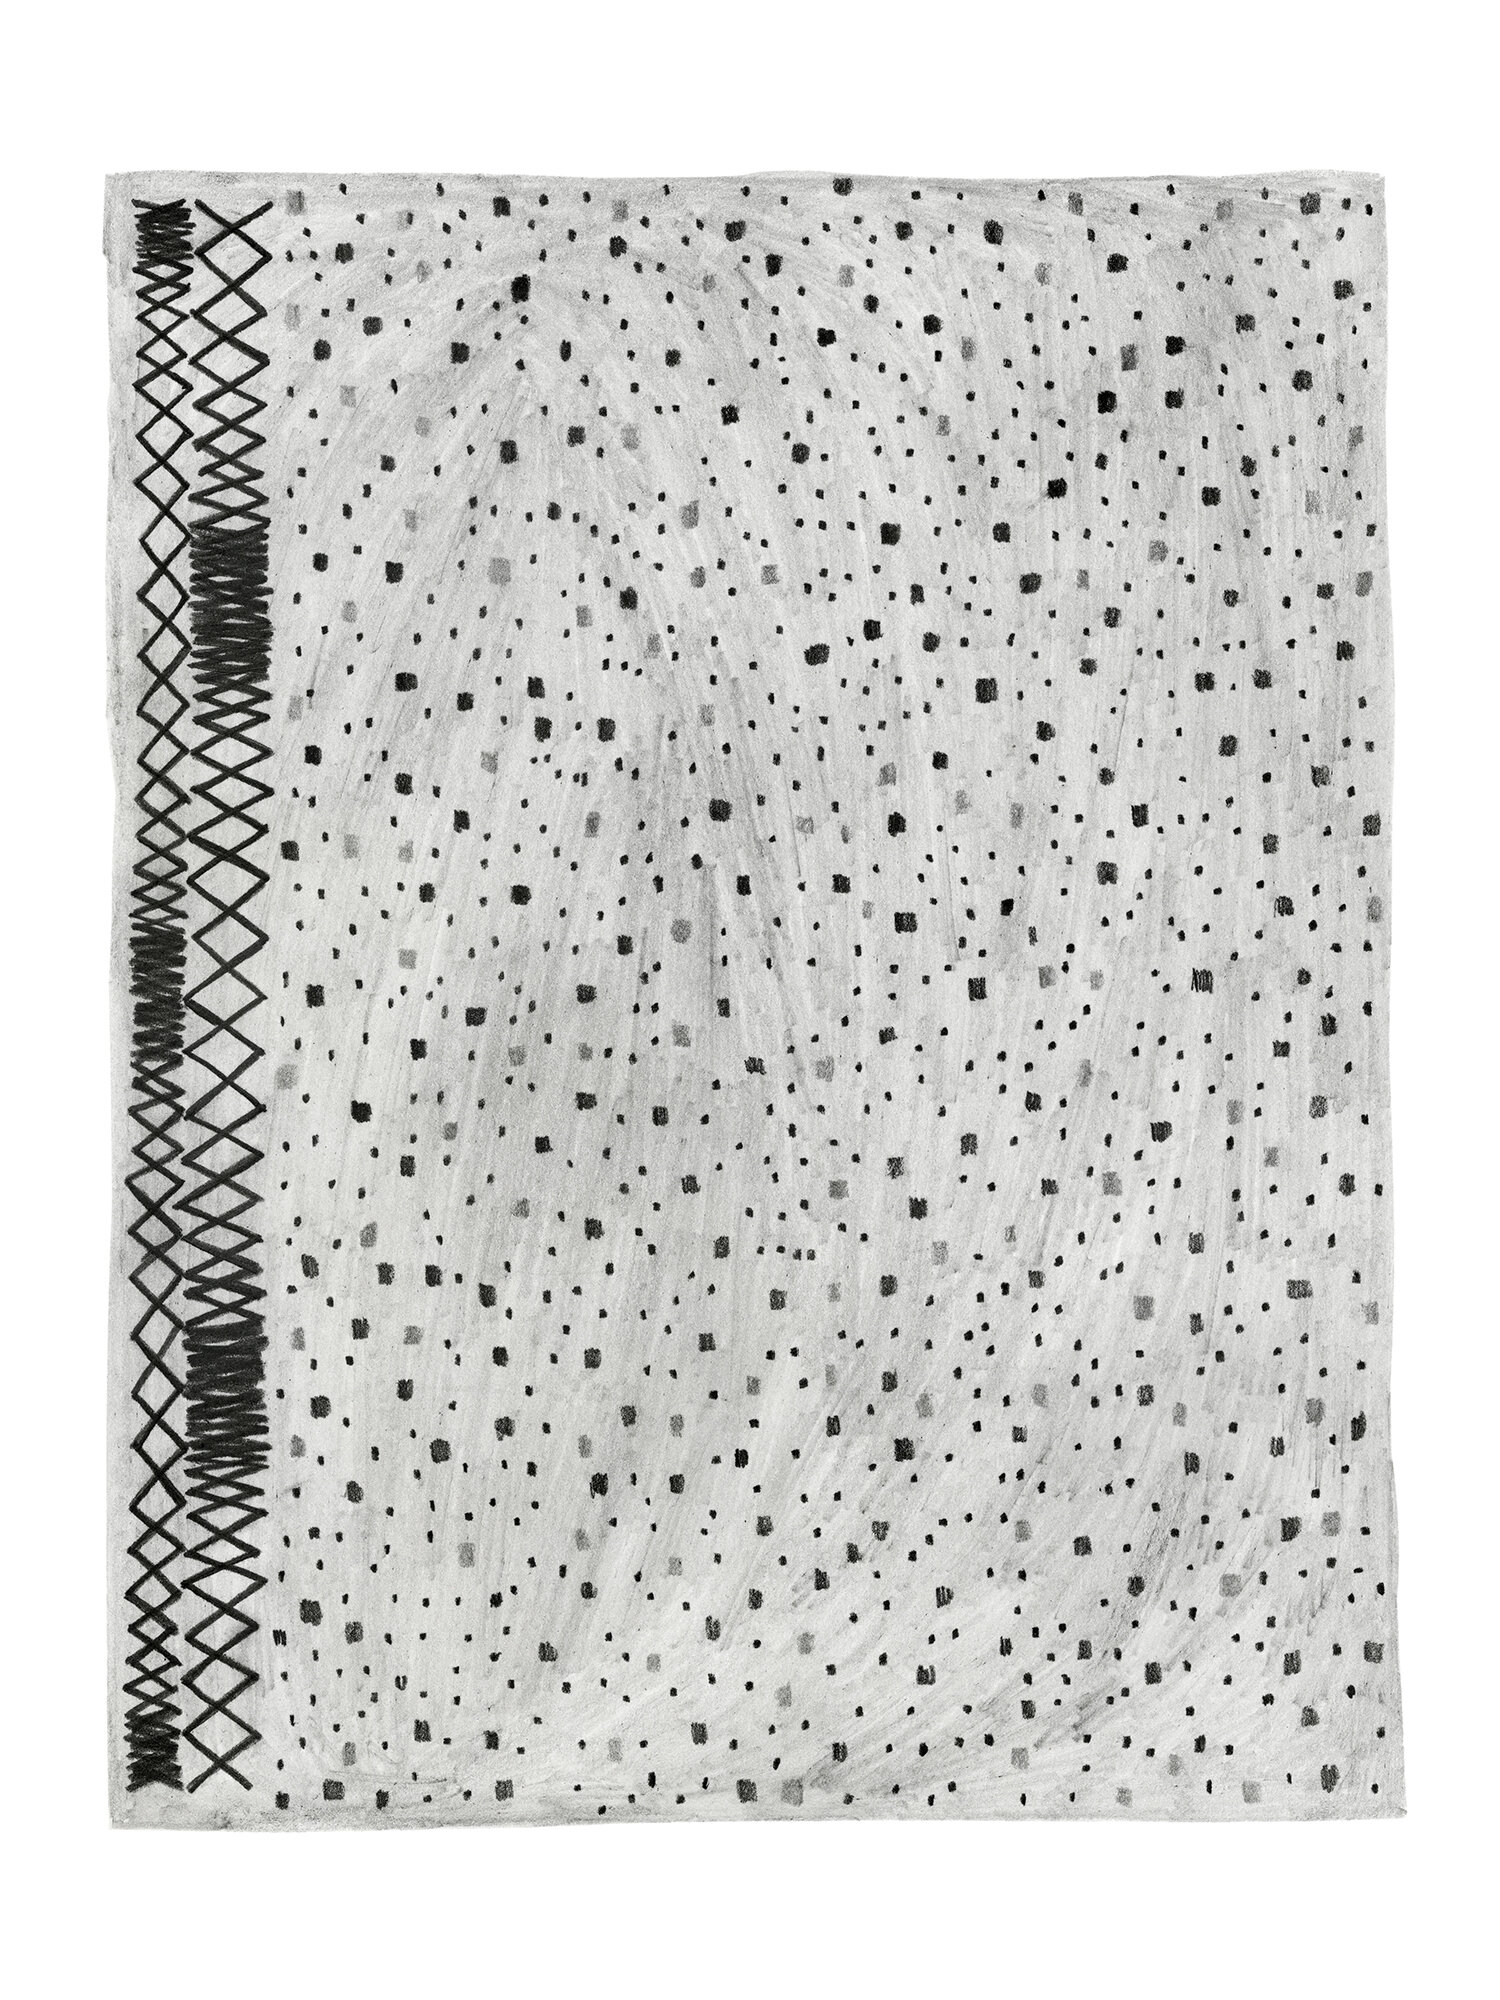   Light Stars with Zig-Zag Rug   Pencil on paper 12 x 9 inches    